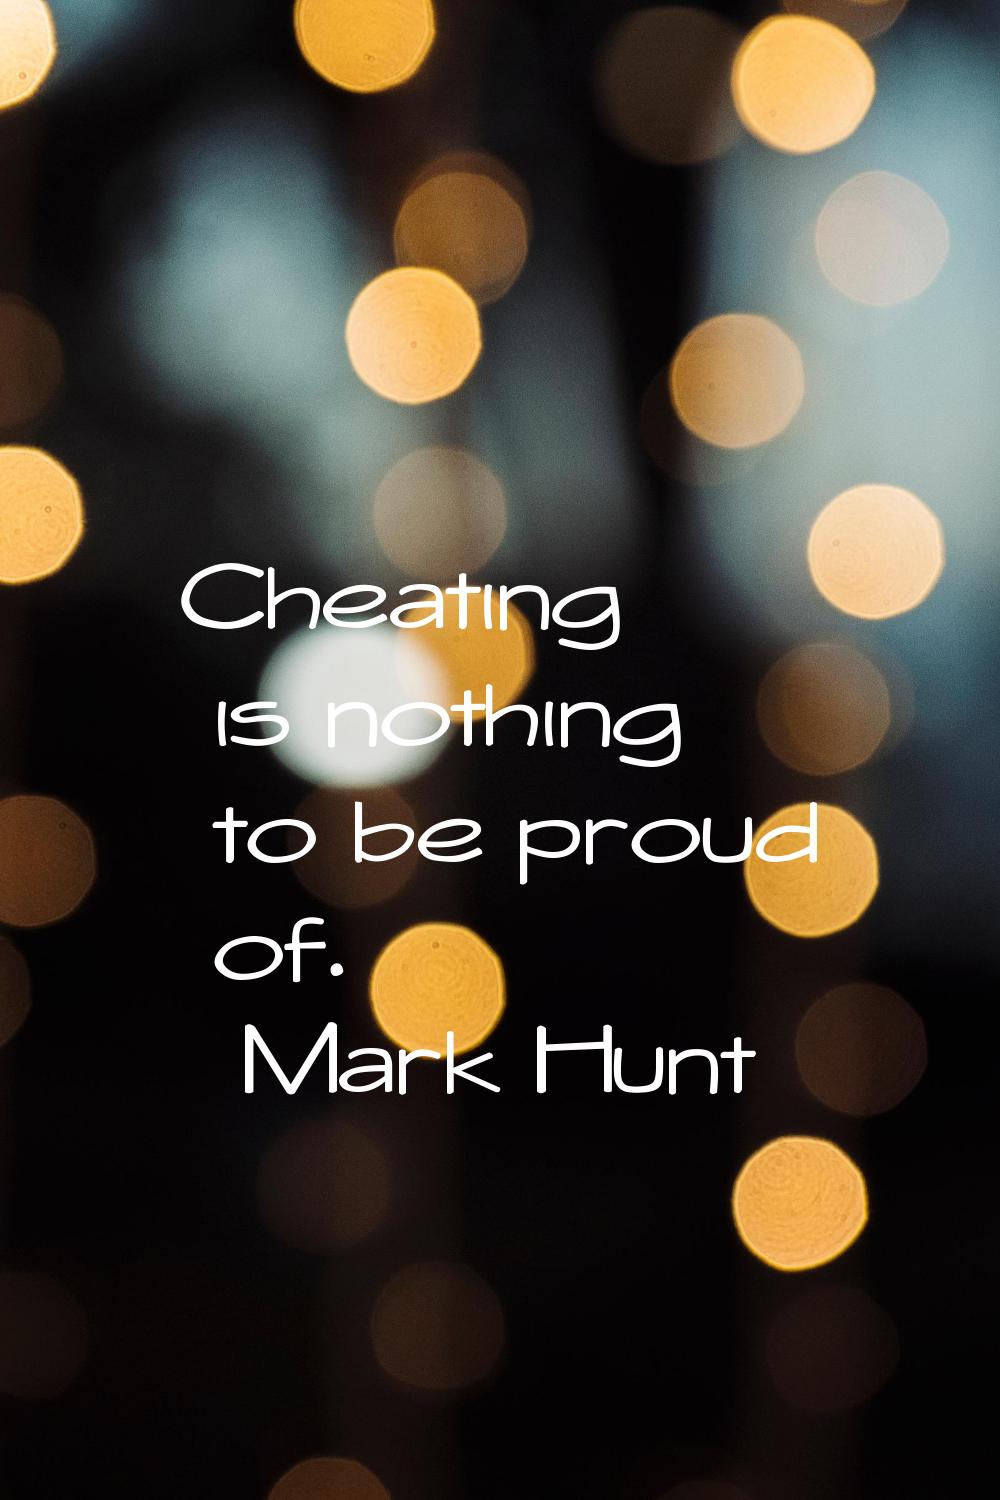 Cheating is nothing to be proud of.